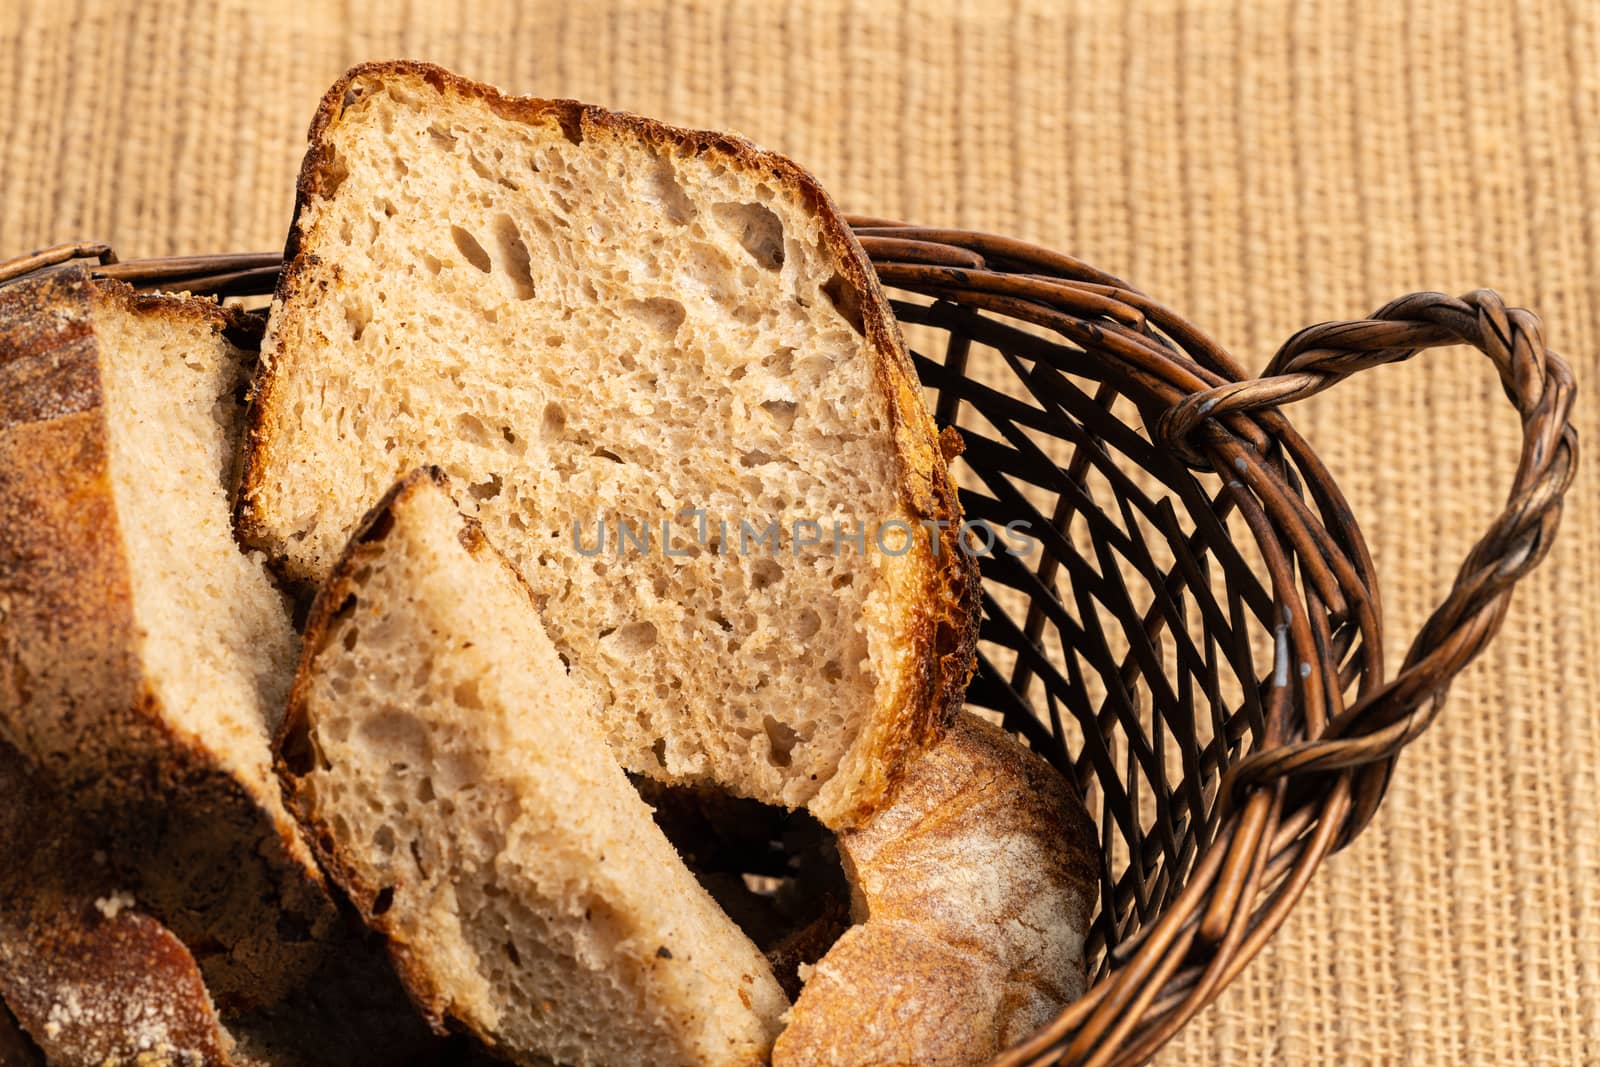 Close up of hearty artisan sourdough bread slices in a bread basket.